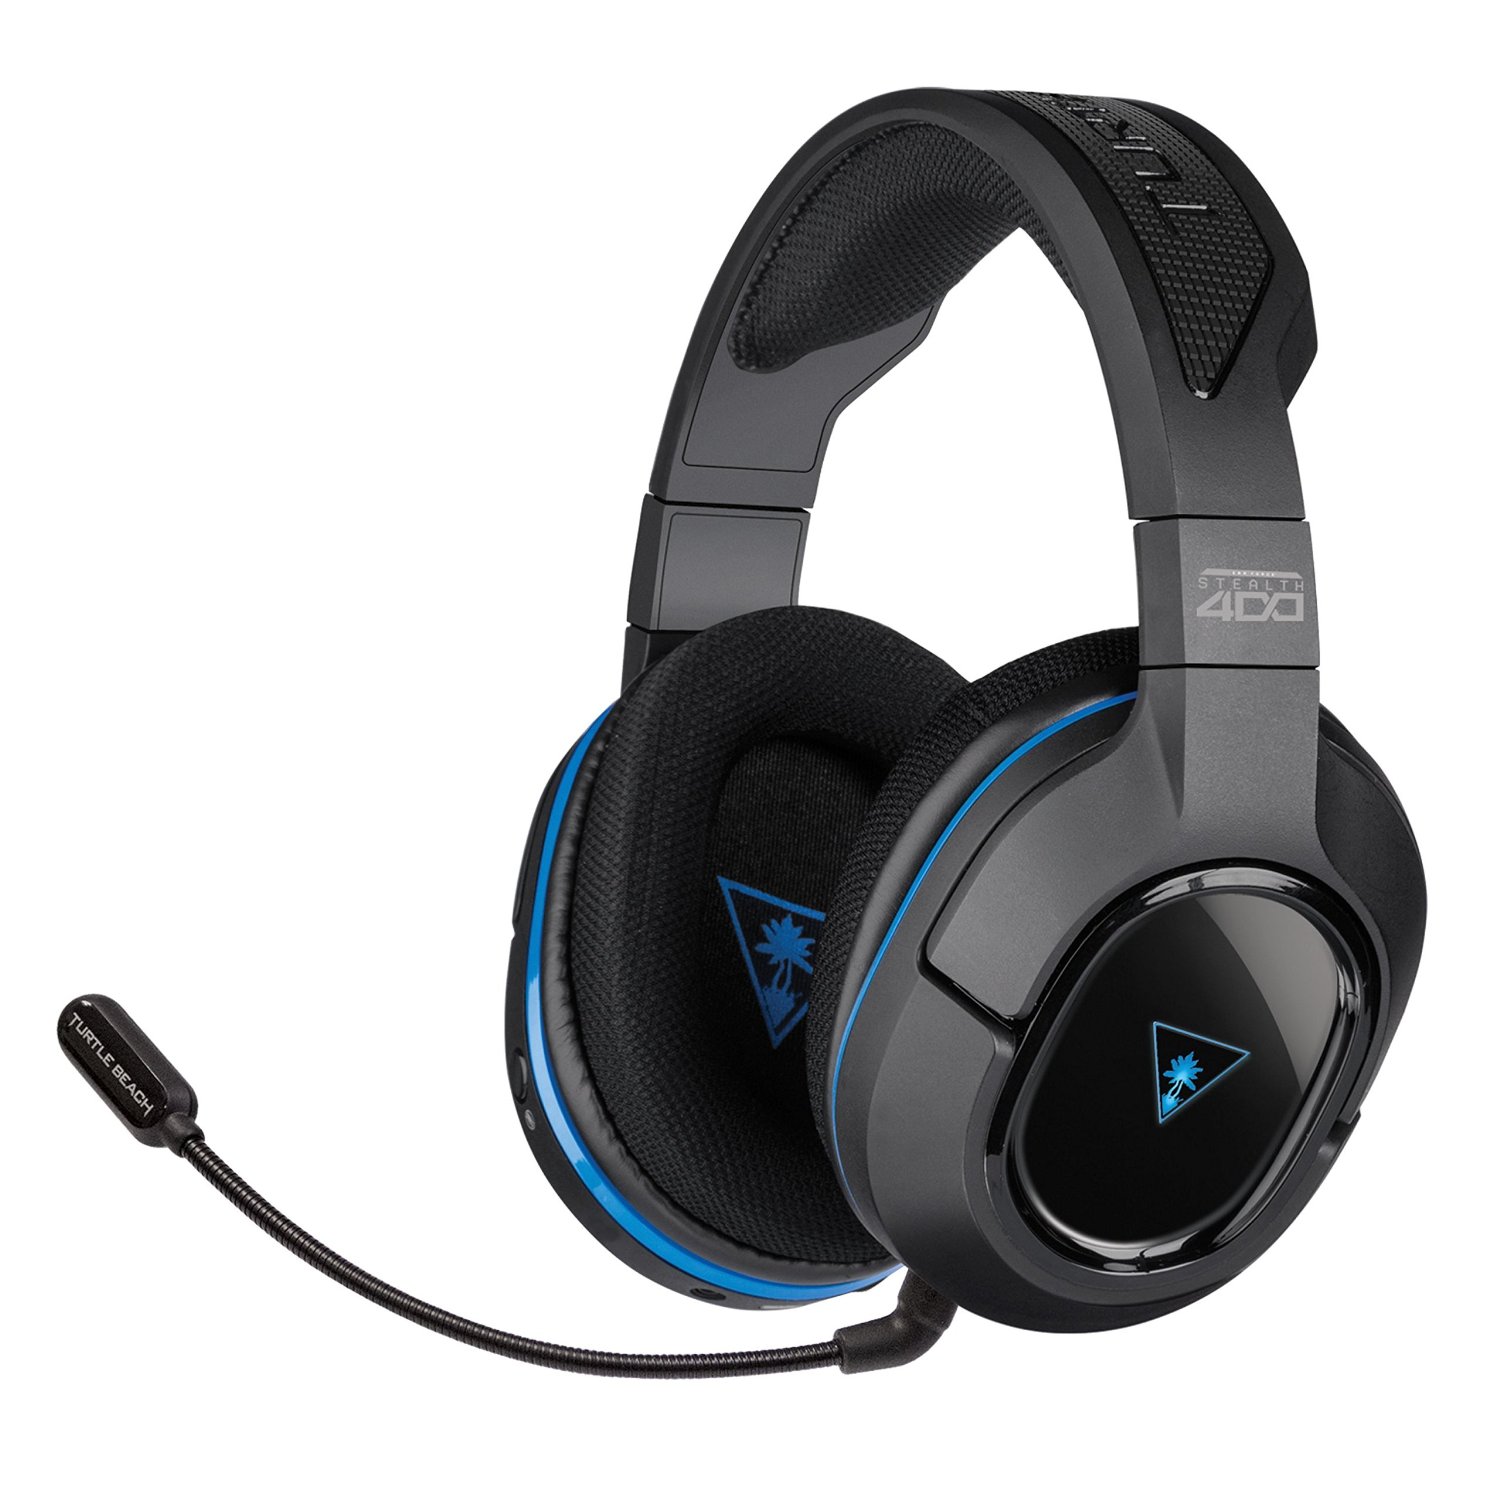 Turtle Beach – Ear Force Stealth Gaming Headset